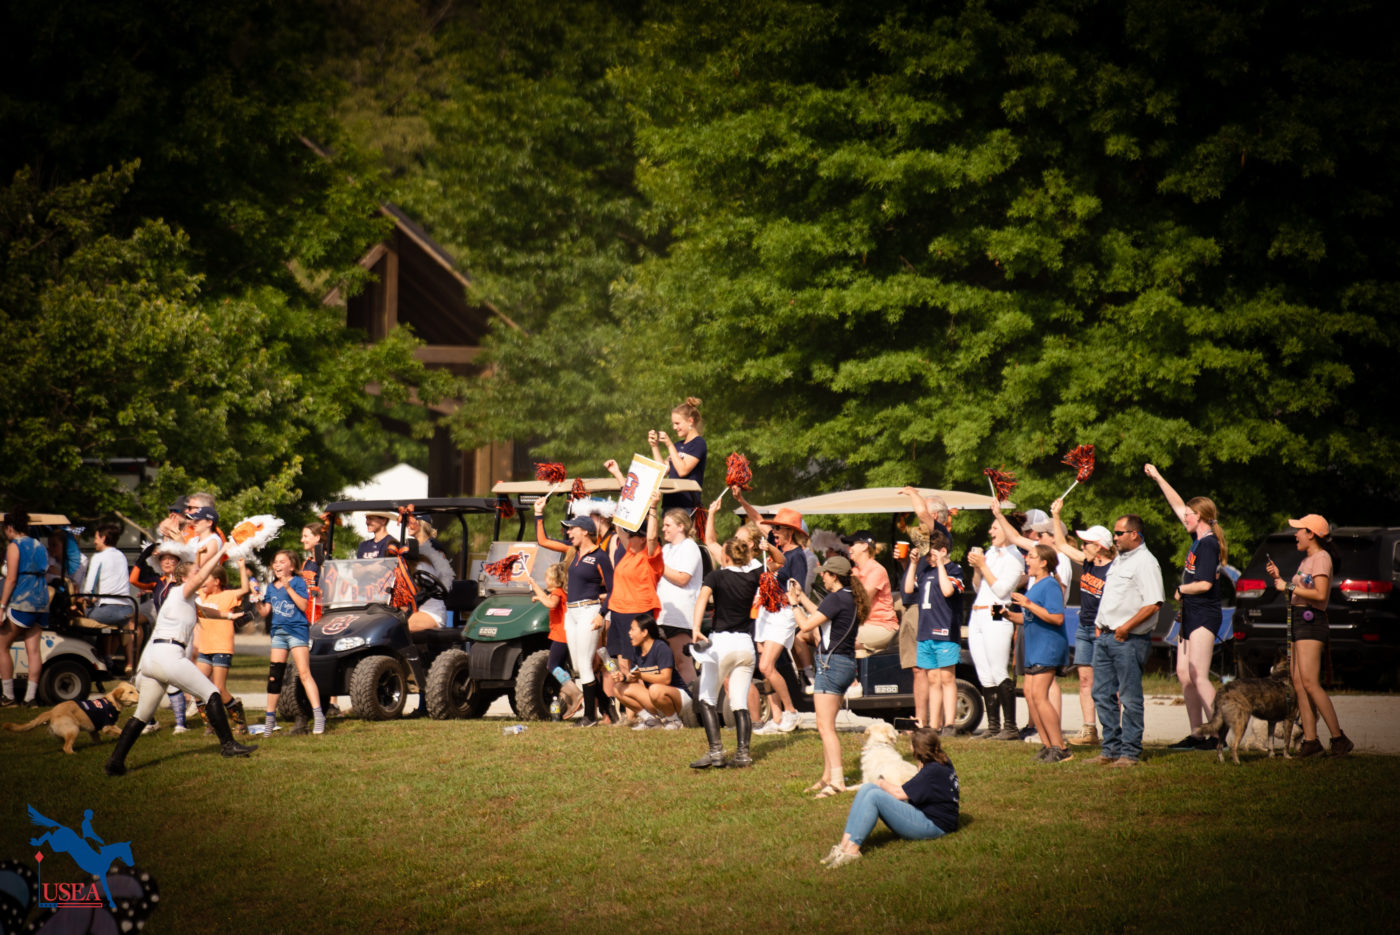 Auburn fans were literally everywhere on the grounds of Chatt Hills. USEA/ Meagan DeLisle photo